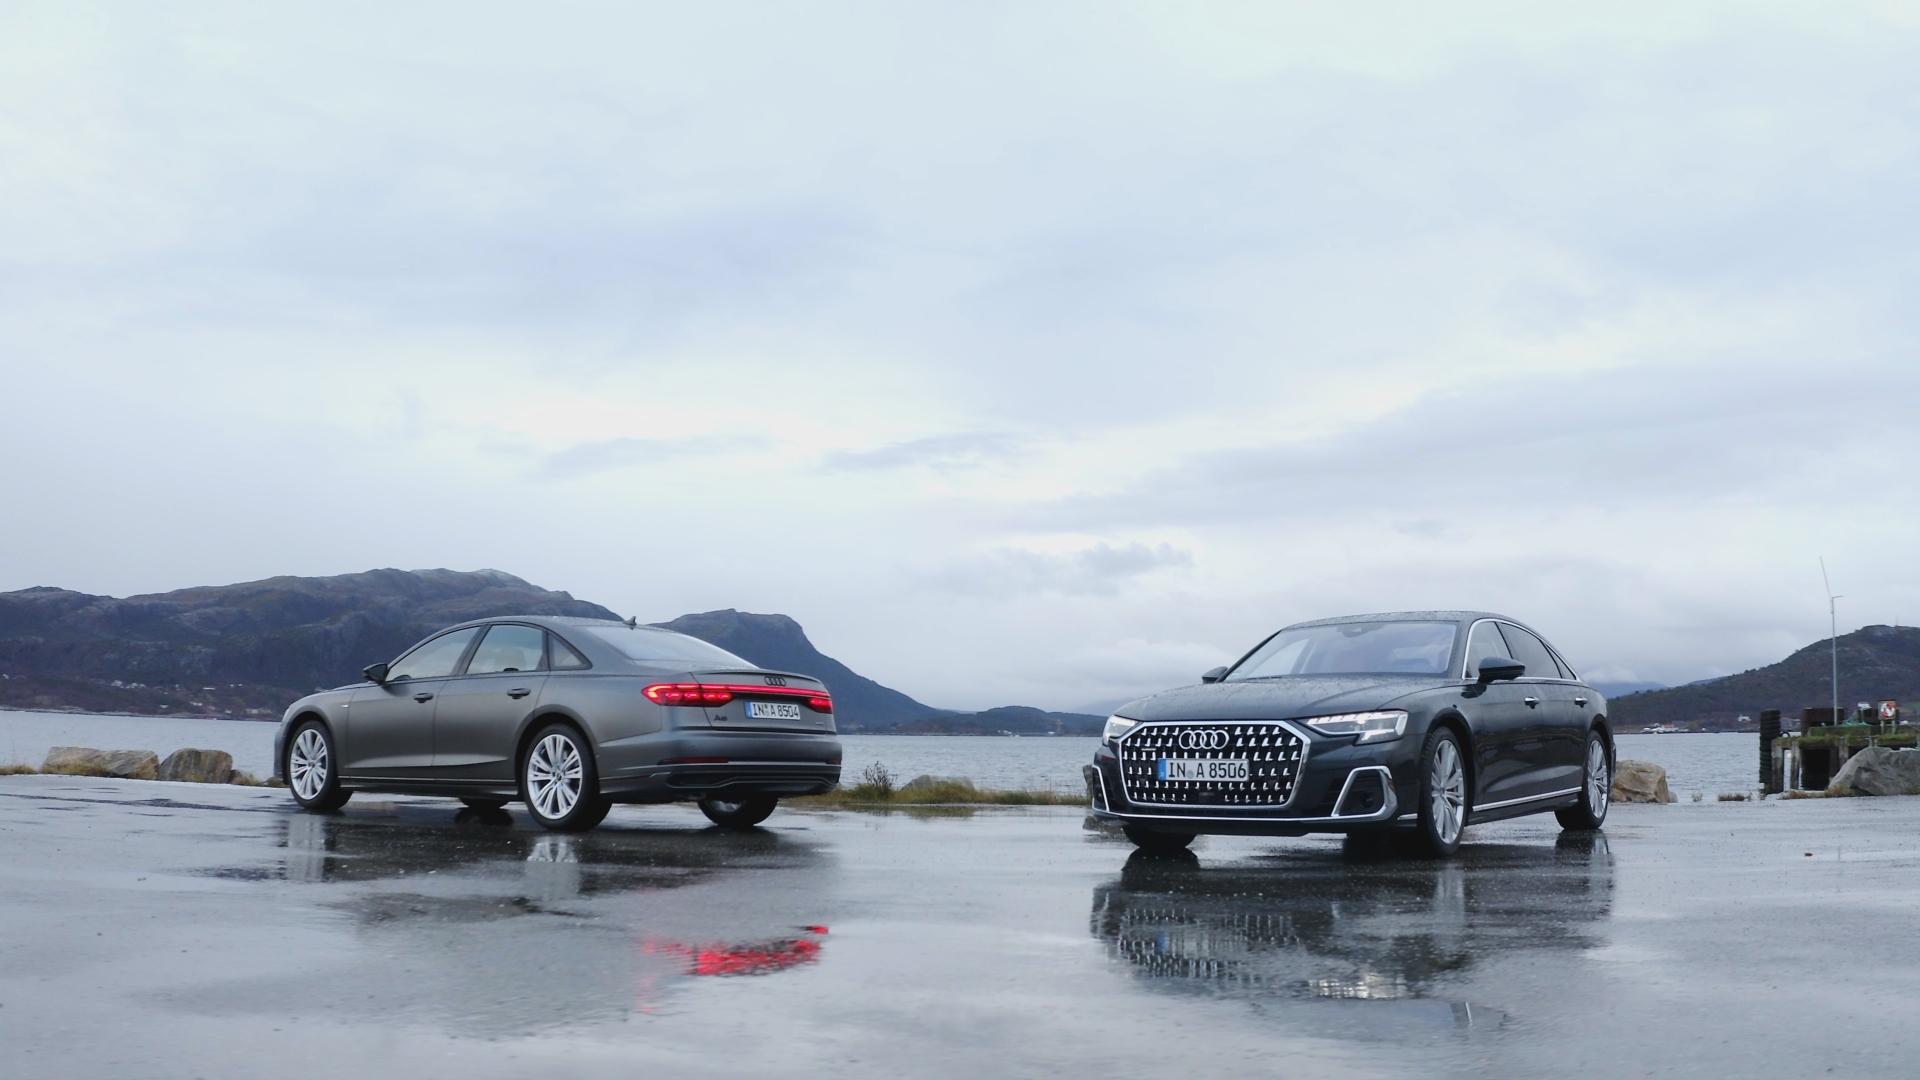 Emotional premium mobility: interior of the Audi A8 offers a high